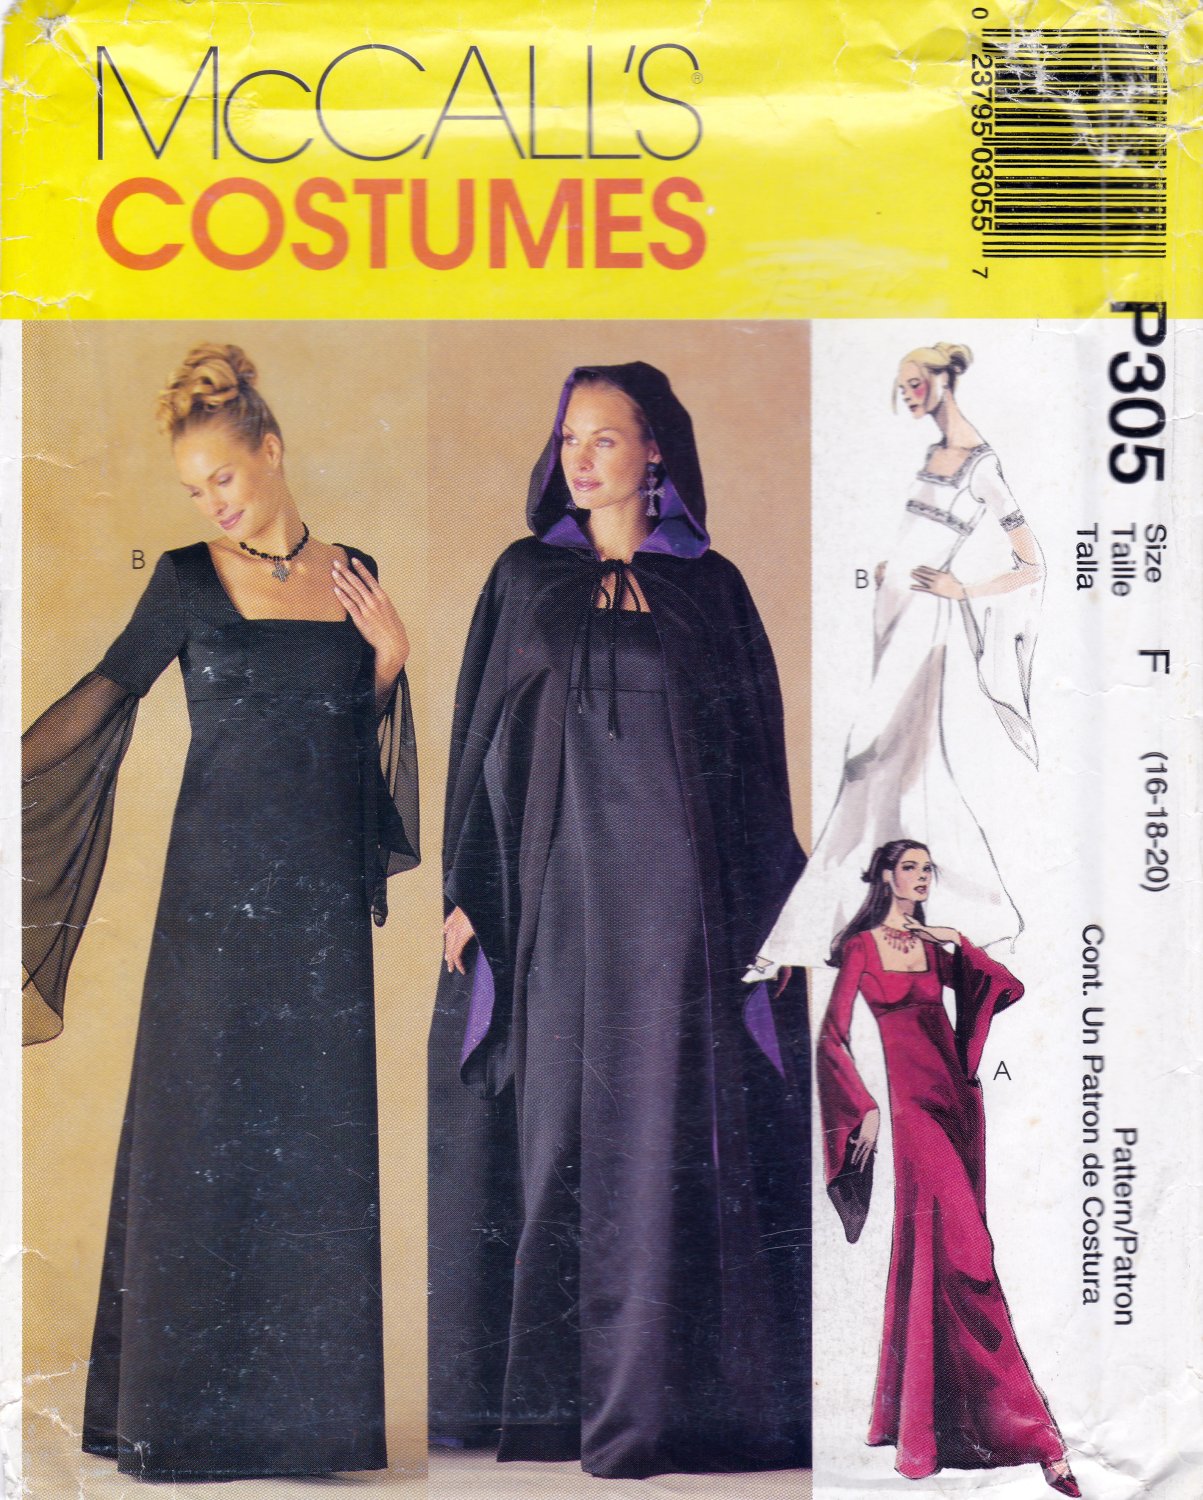 McCall's P305 or 2810 Misses Cosplay Petite Lined Gown Cape Costumes Sewing Pattern Sizes 16-18-20